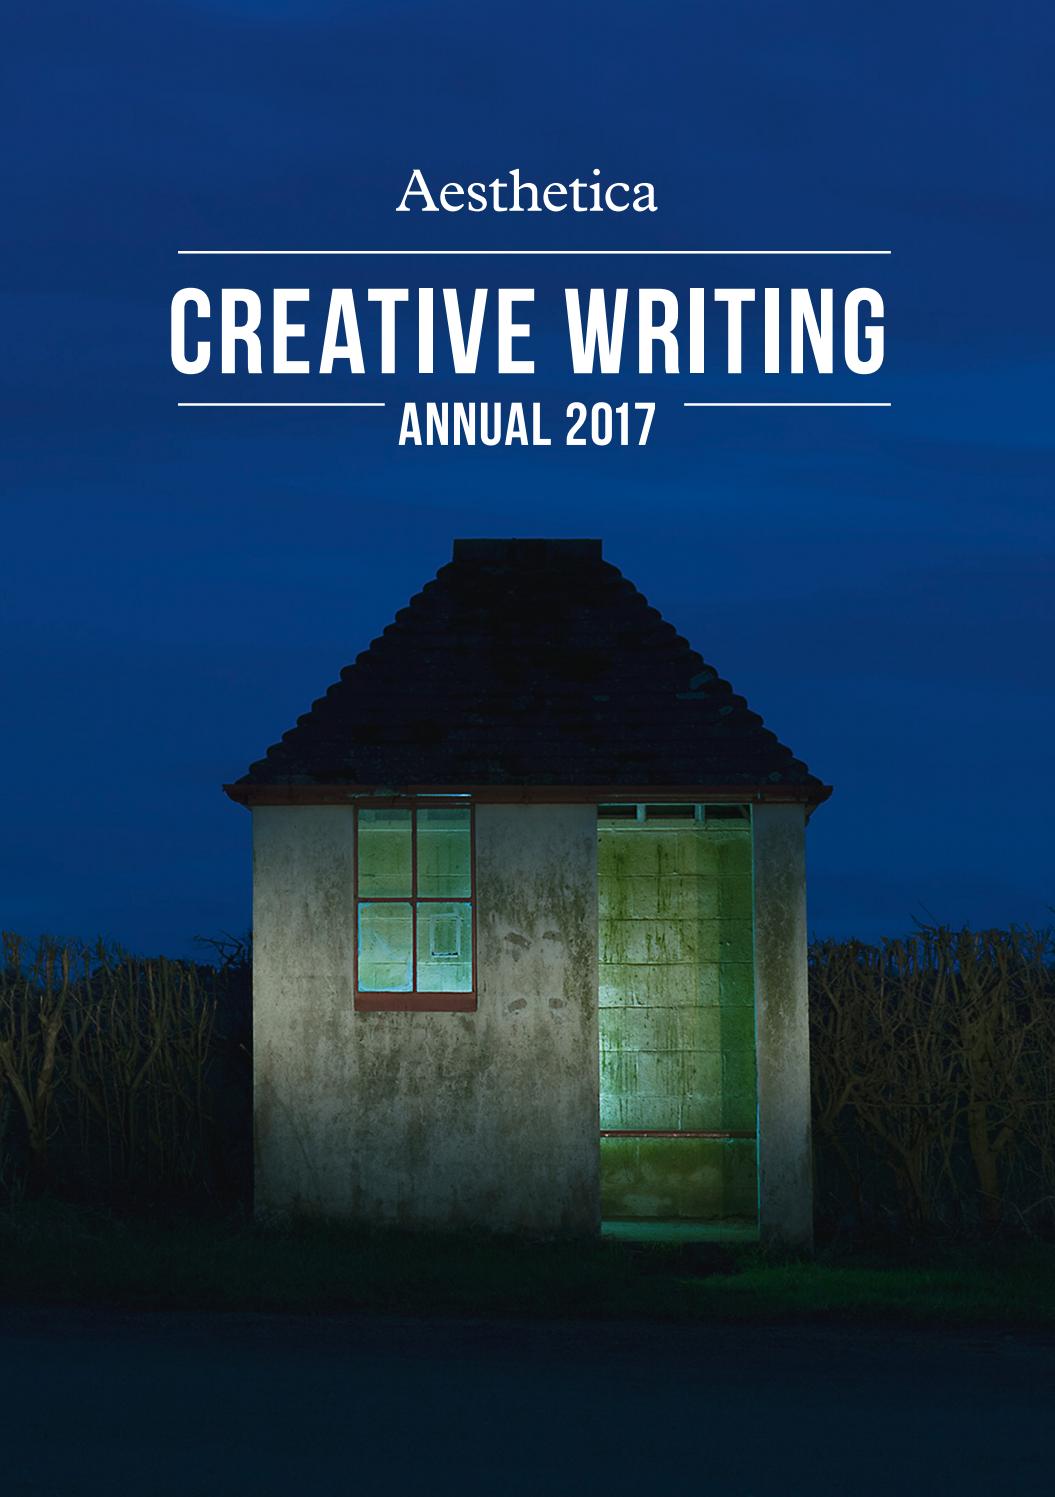 Alexandra Strnad - 'Sandstorm' featured in Aesthetica Creative Writing Annual, 2017.